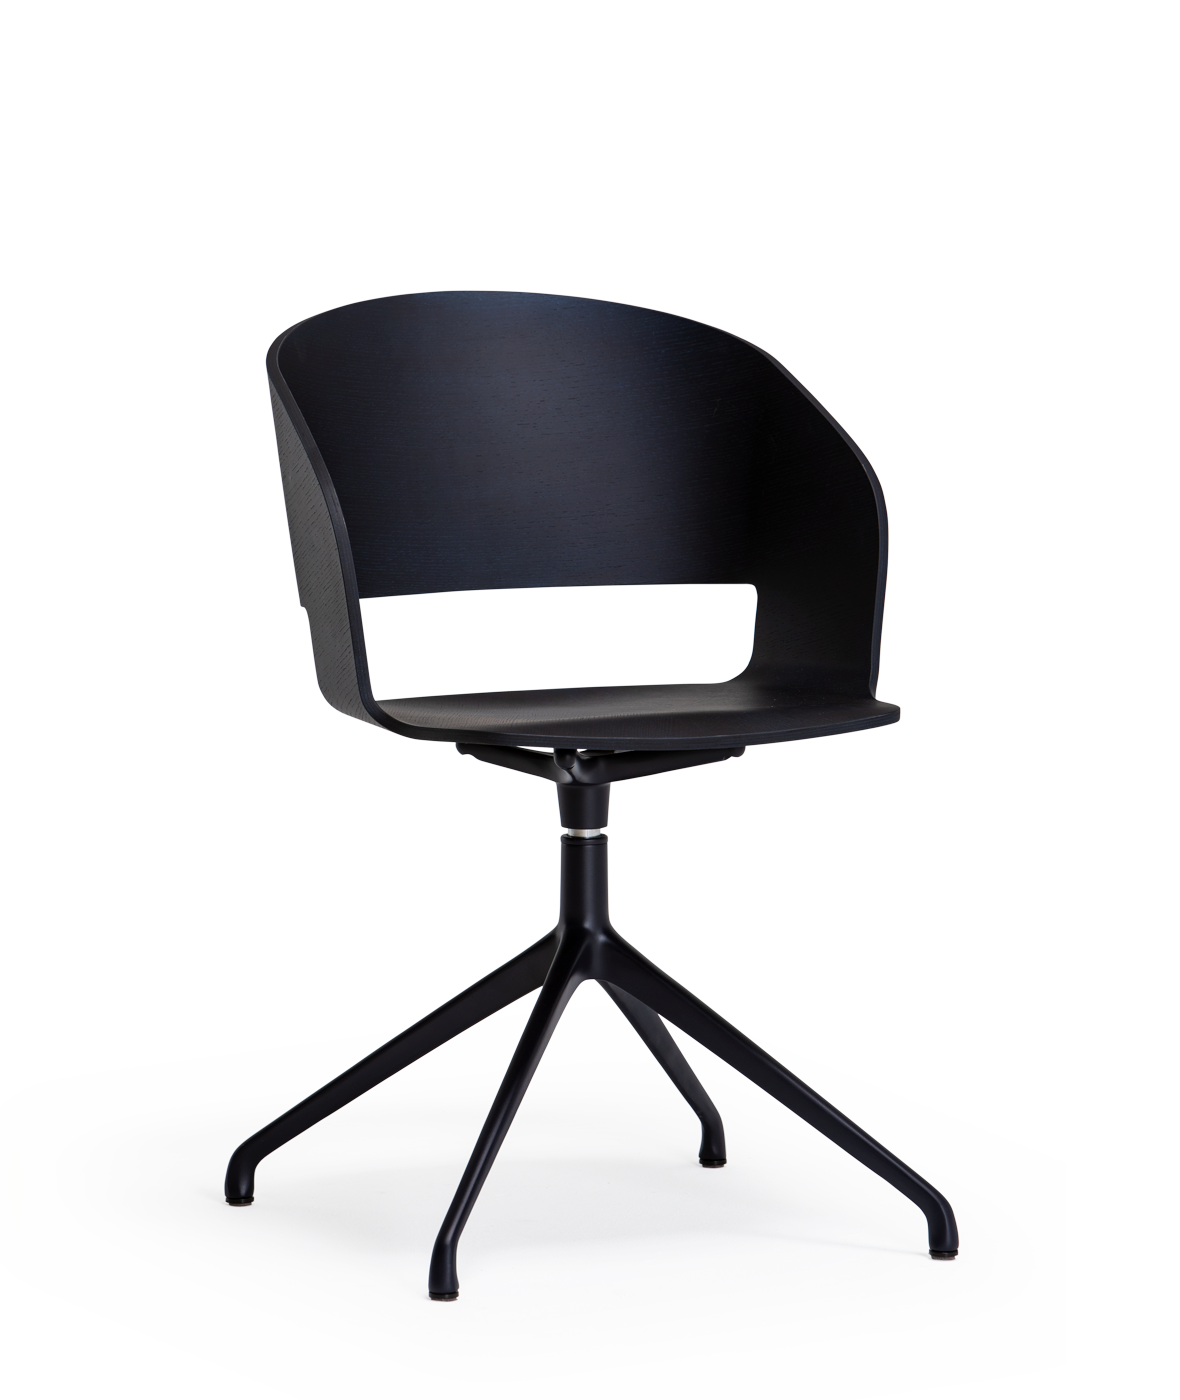 Vergés - Goose chair Model A with armrests and swivel base with 4 legs